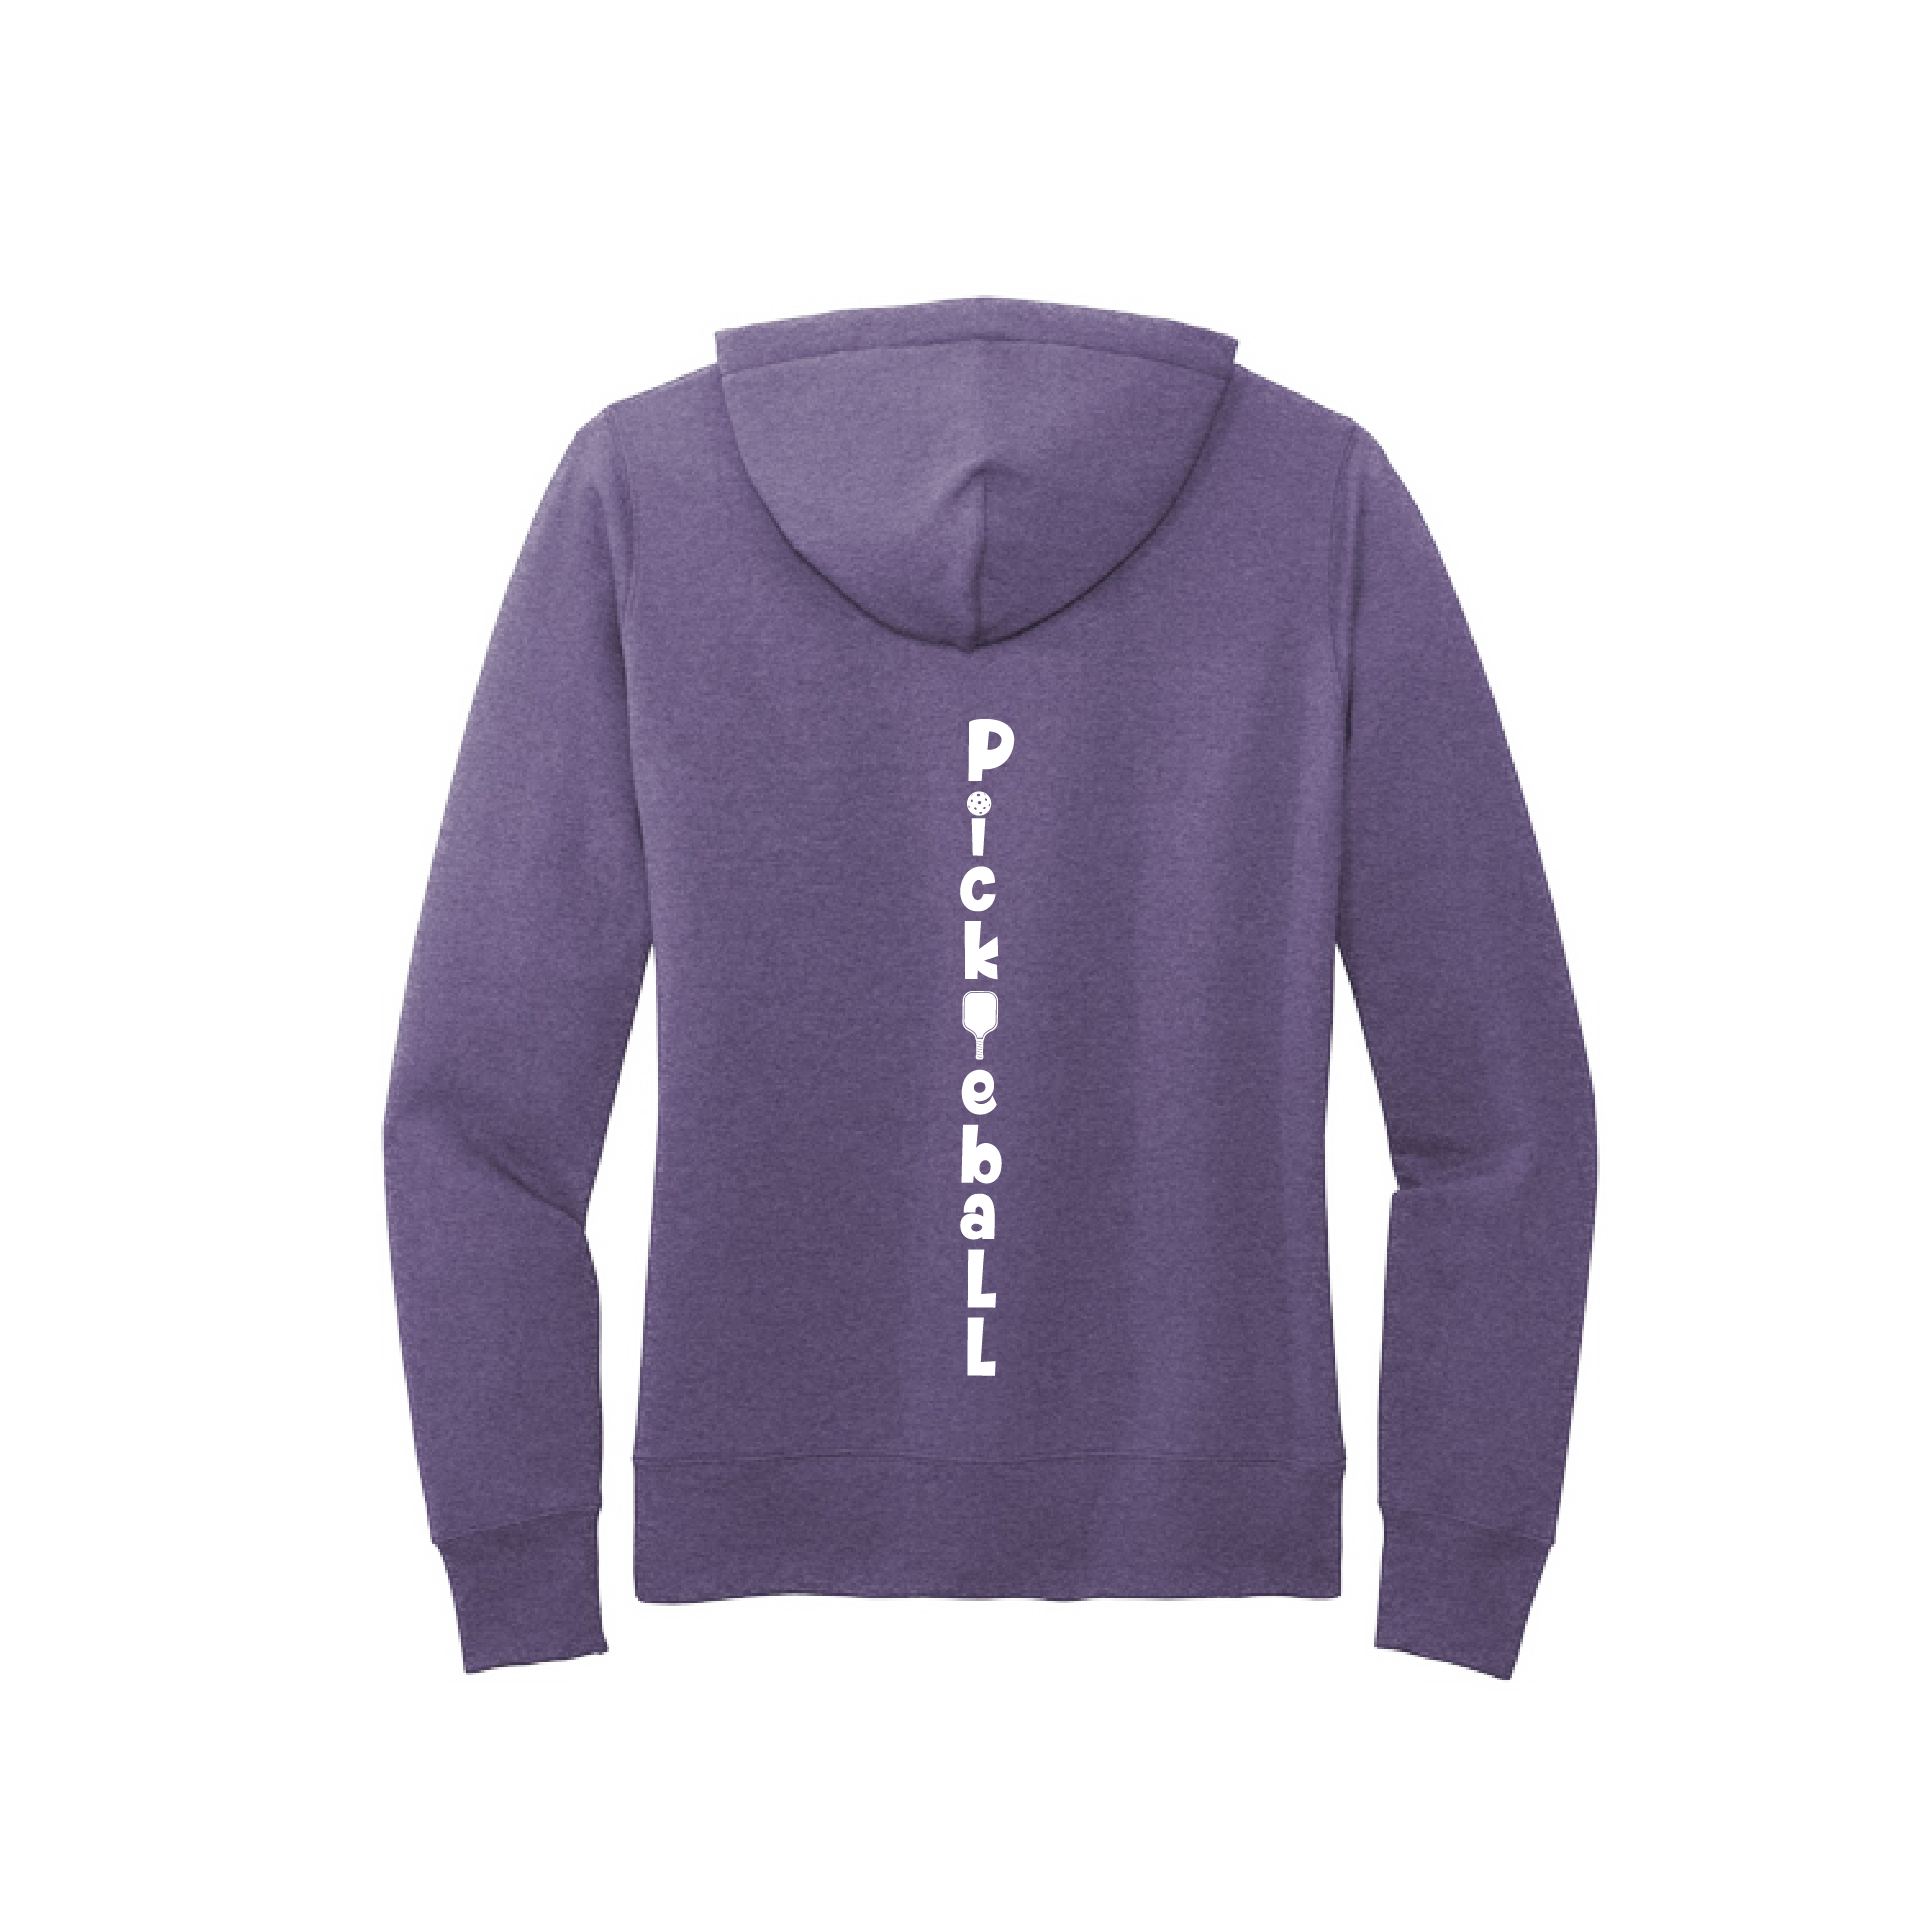 Pickleball Design: Pickleball Vertical (Customizable Location)  Women's Hooded pullover Sweatshirt  Turn up the volume in this Women's Sweatshirts with its perfect mix of softness and attitude. Ultra soft lined inside with a lined hood also. This is fitted nicely for a women's figure. Front pouch pocket.